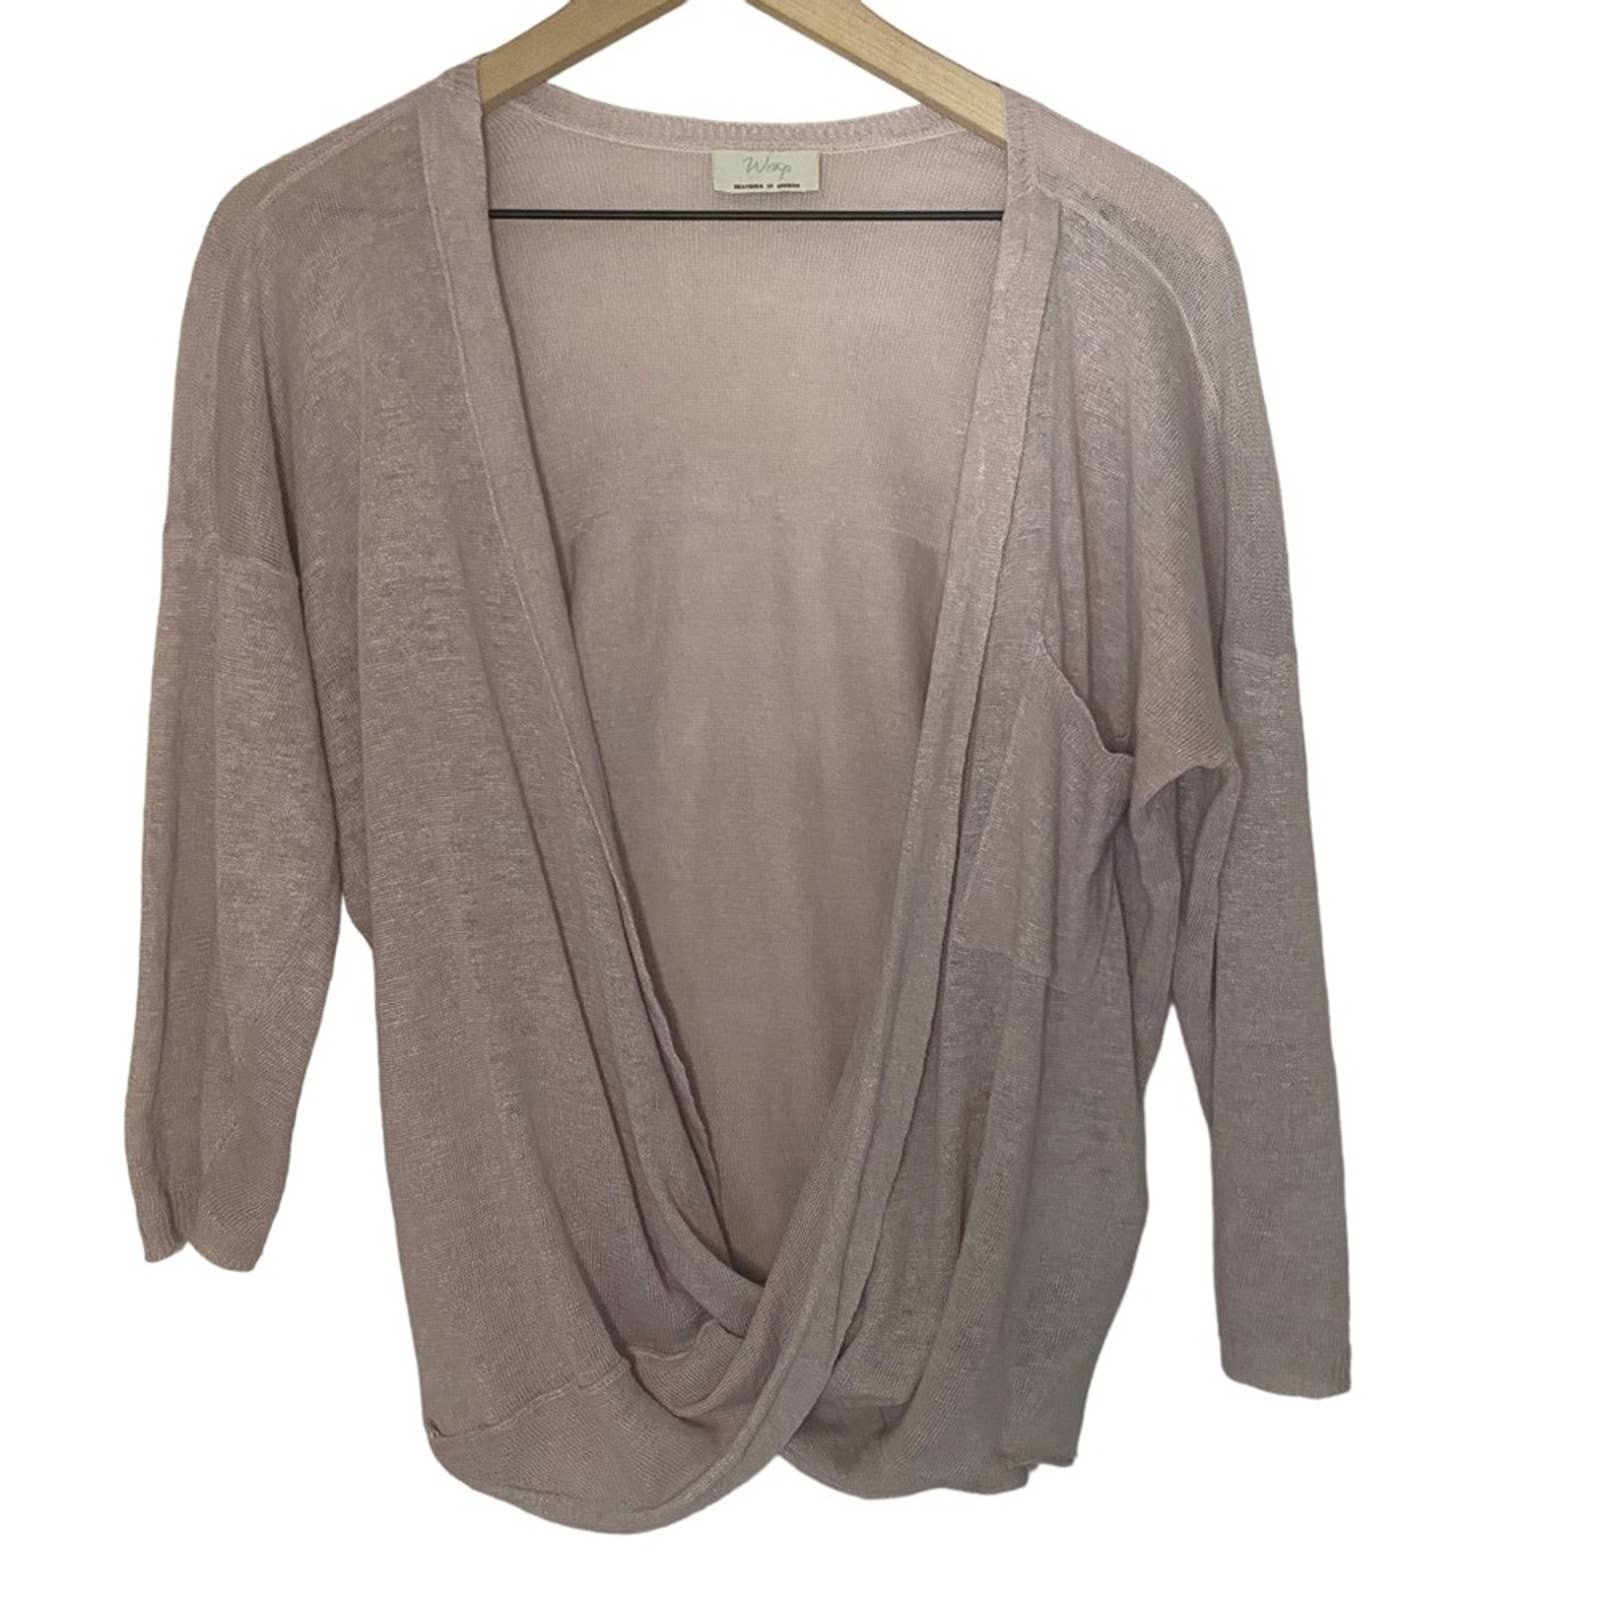 High quality Wrap London 100% Linen Dusty Pink Sweater 